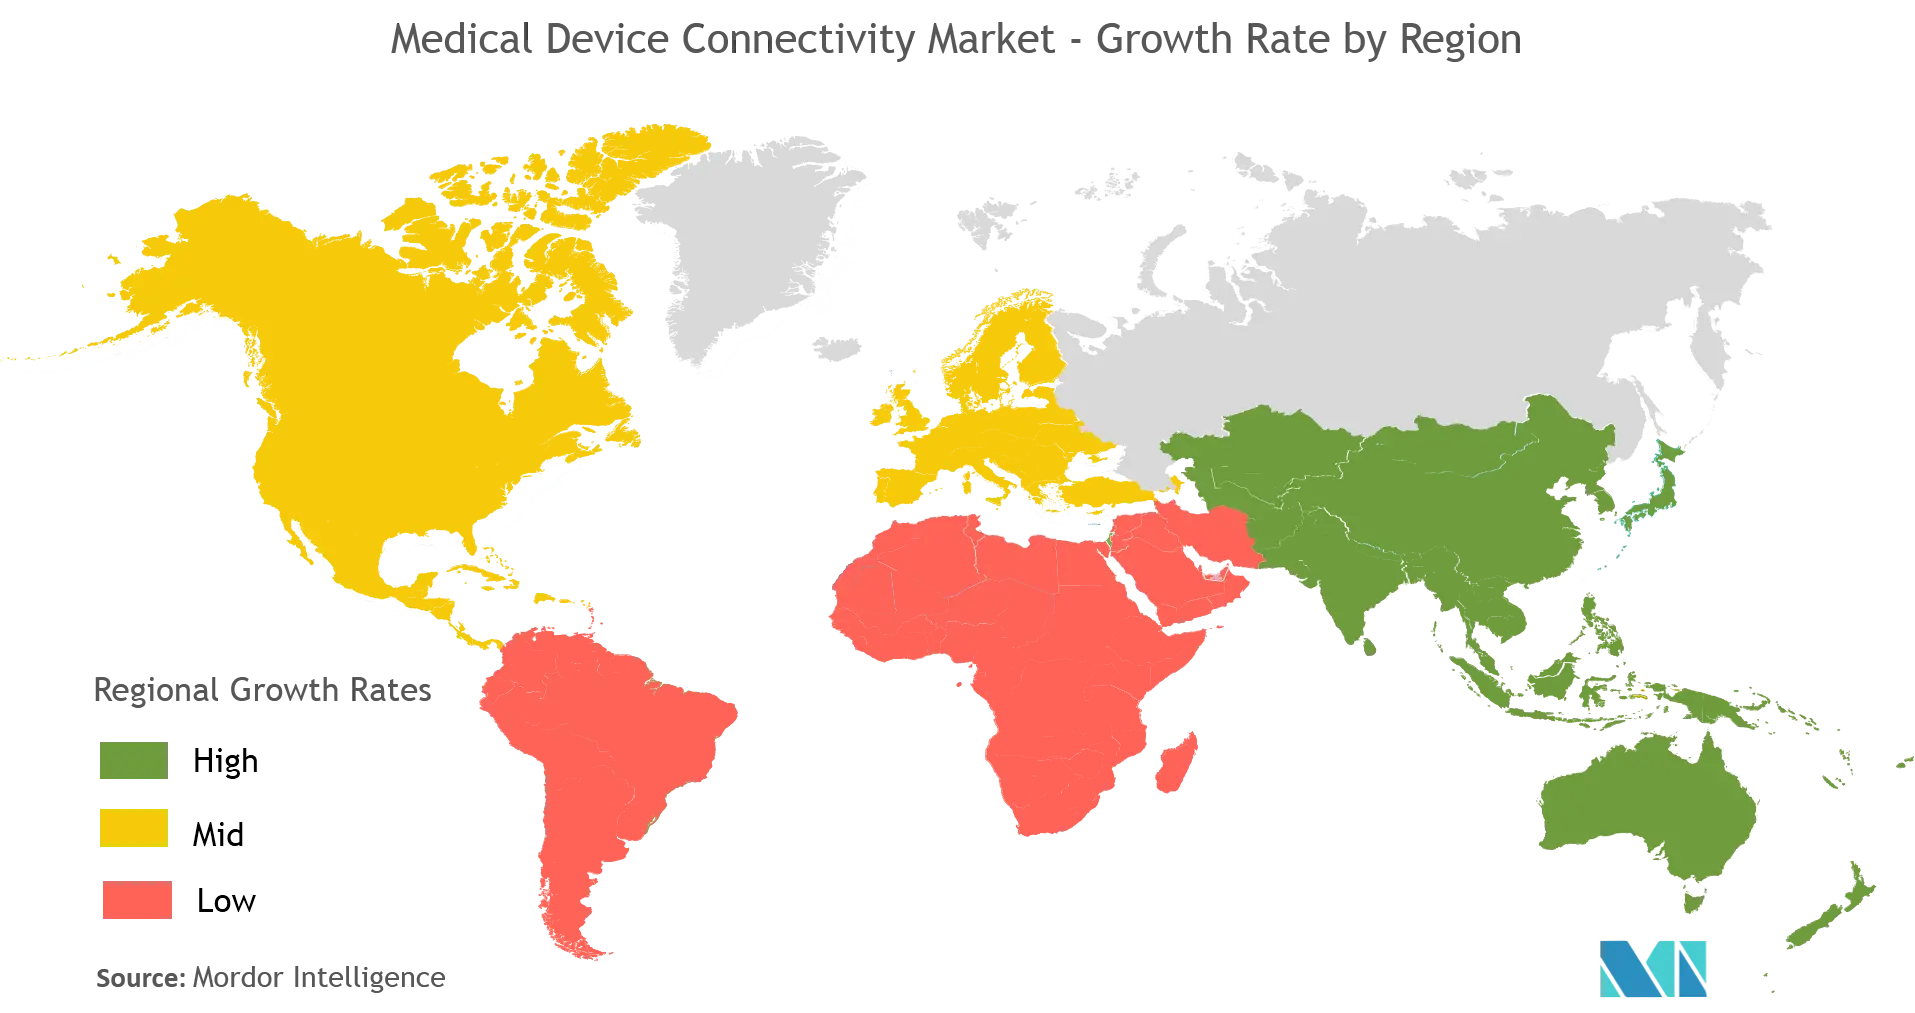  Medical Device Connectivity Market Growth by Region